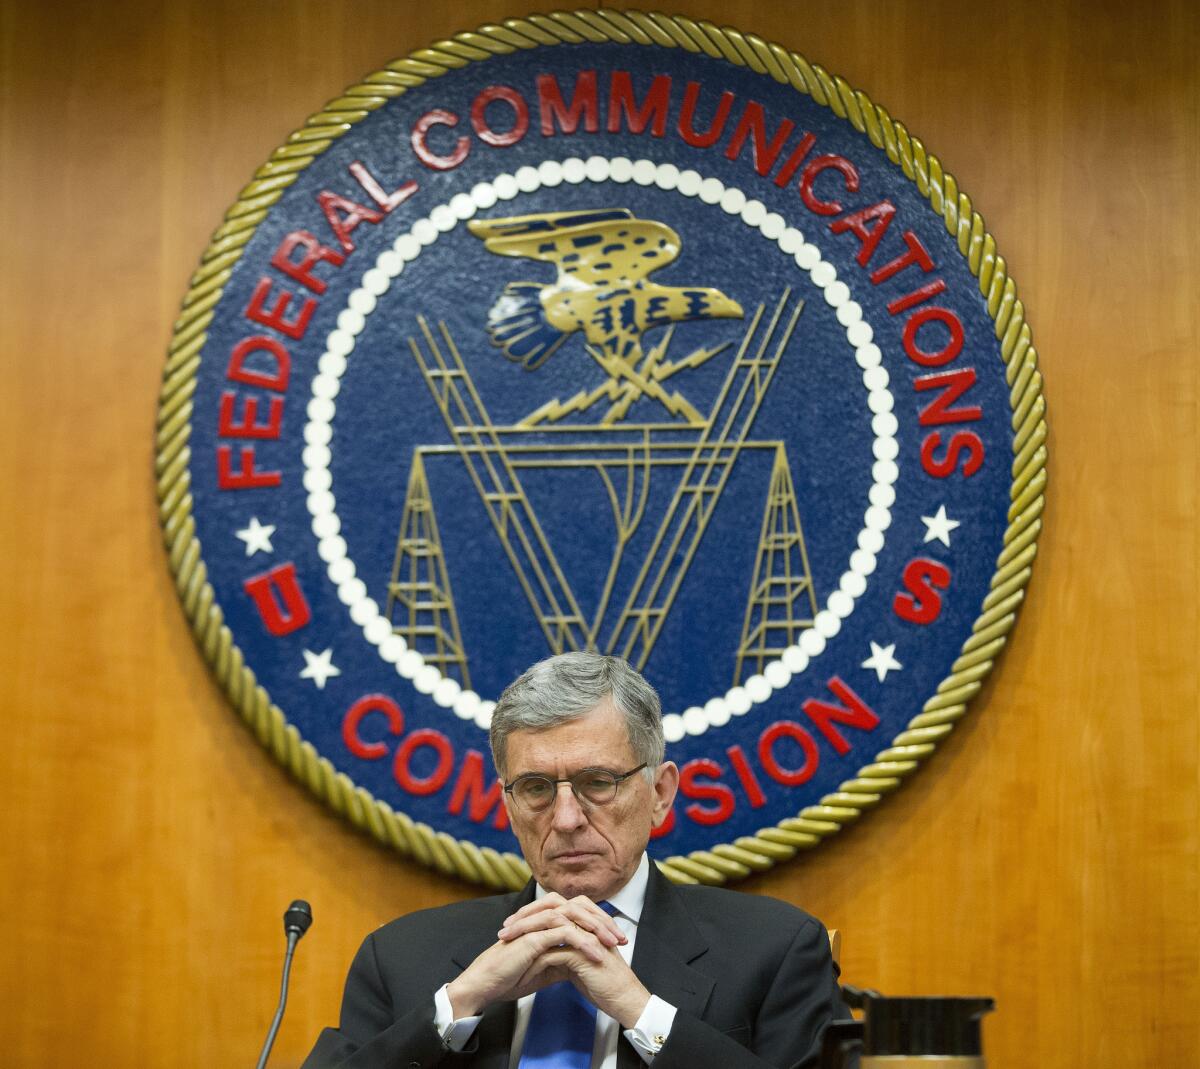 Federal Communications Commission Chairman Tom Wheeler pauses during a meeting in Washington on Feb. 26, 2015.